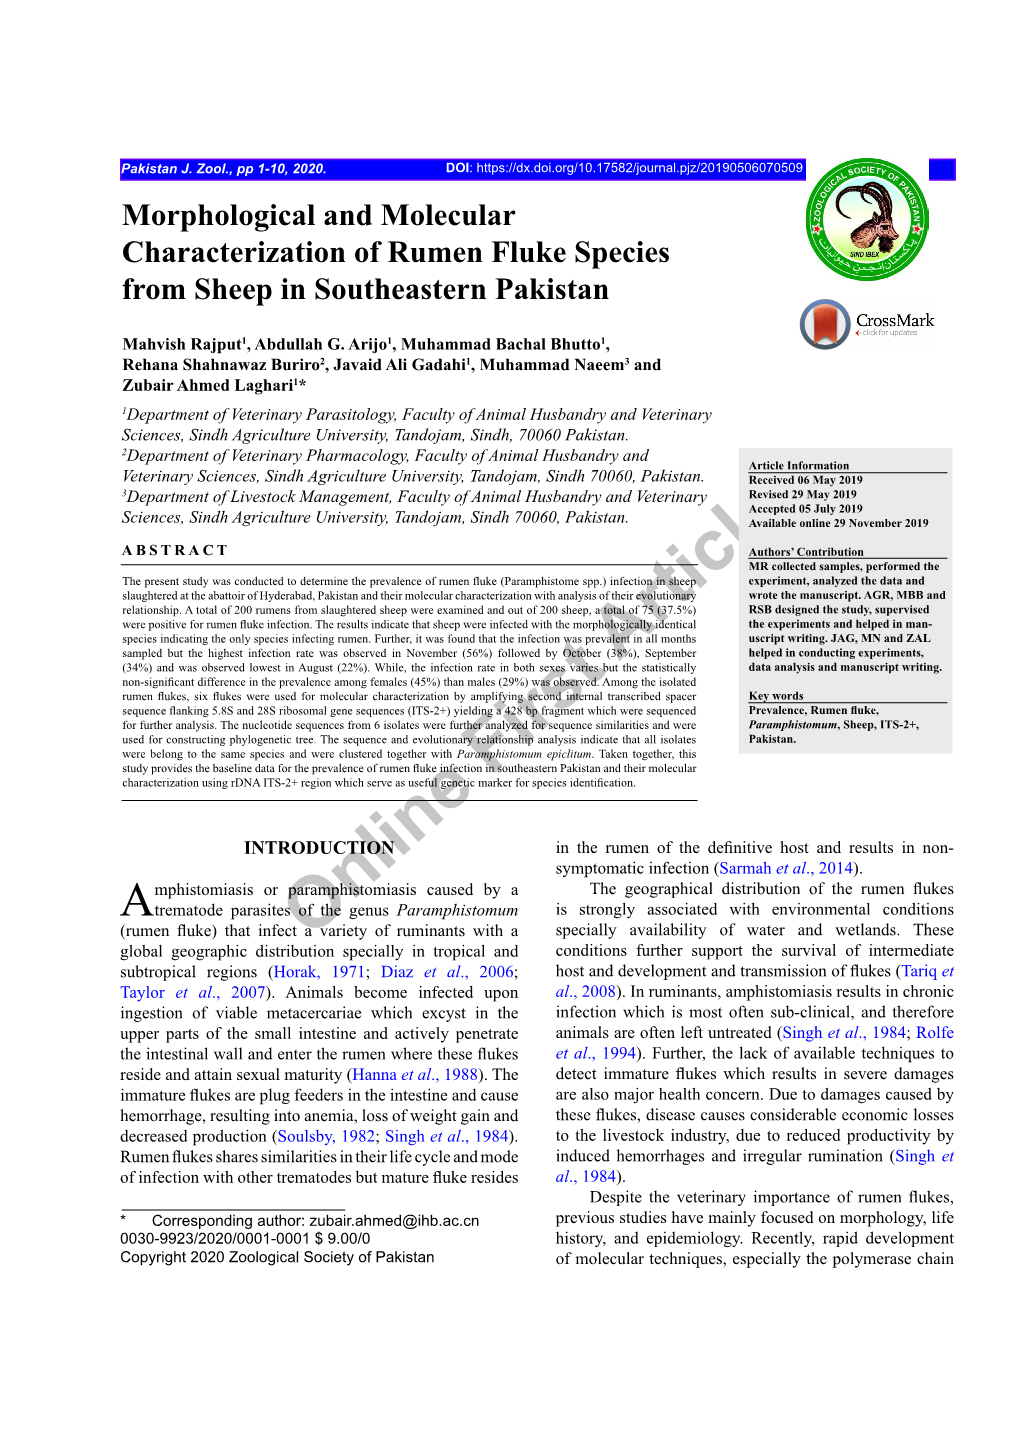 Morphological and Molecular Characterization of Rumen Fluke Species from Sheep in Southeastern Pakistan